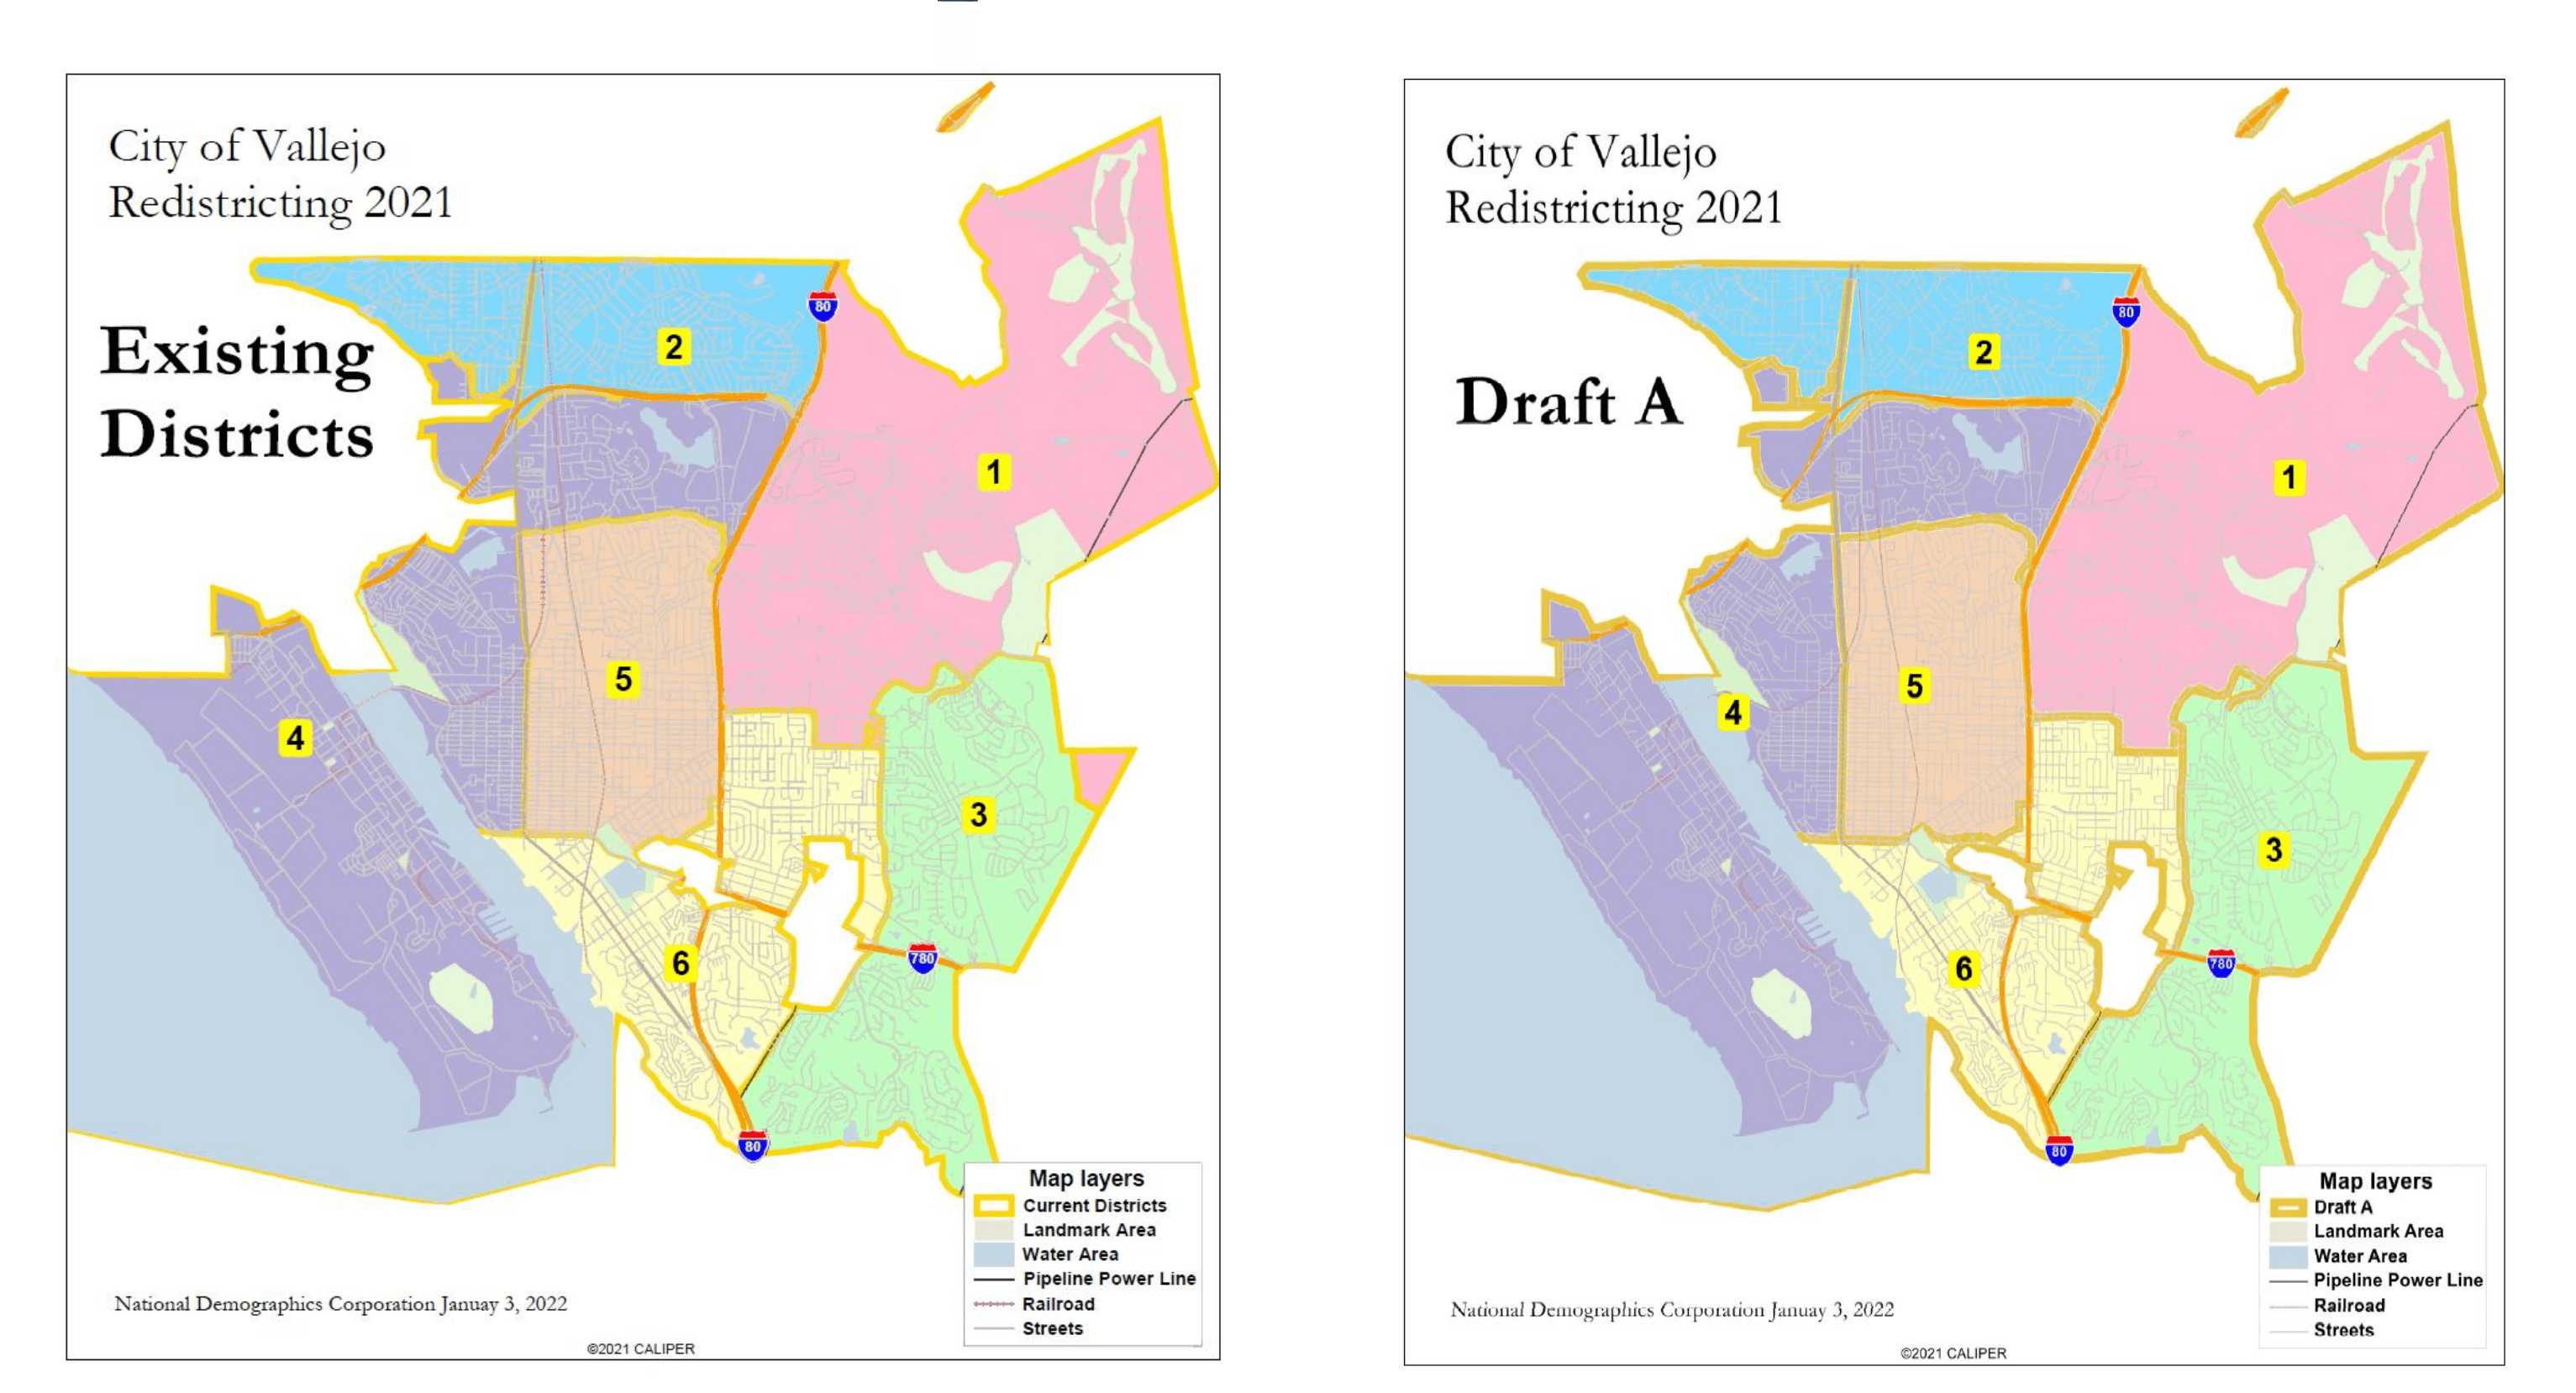 A draft redistricting map for the city of Vallejo.